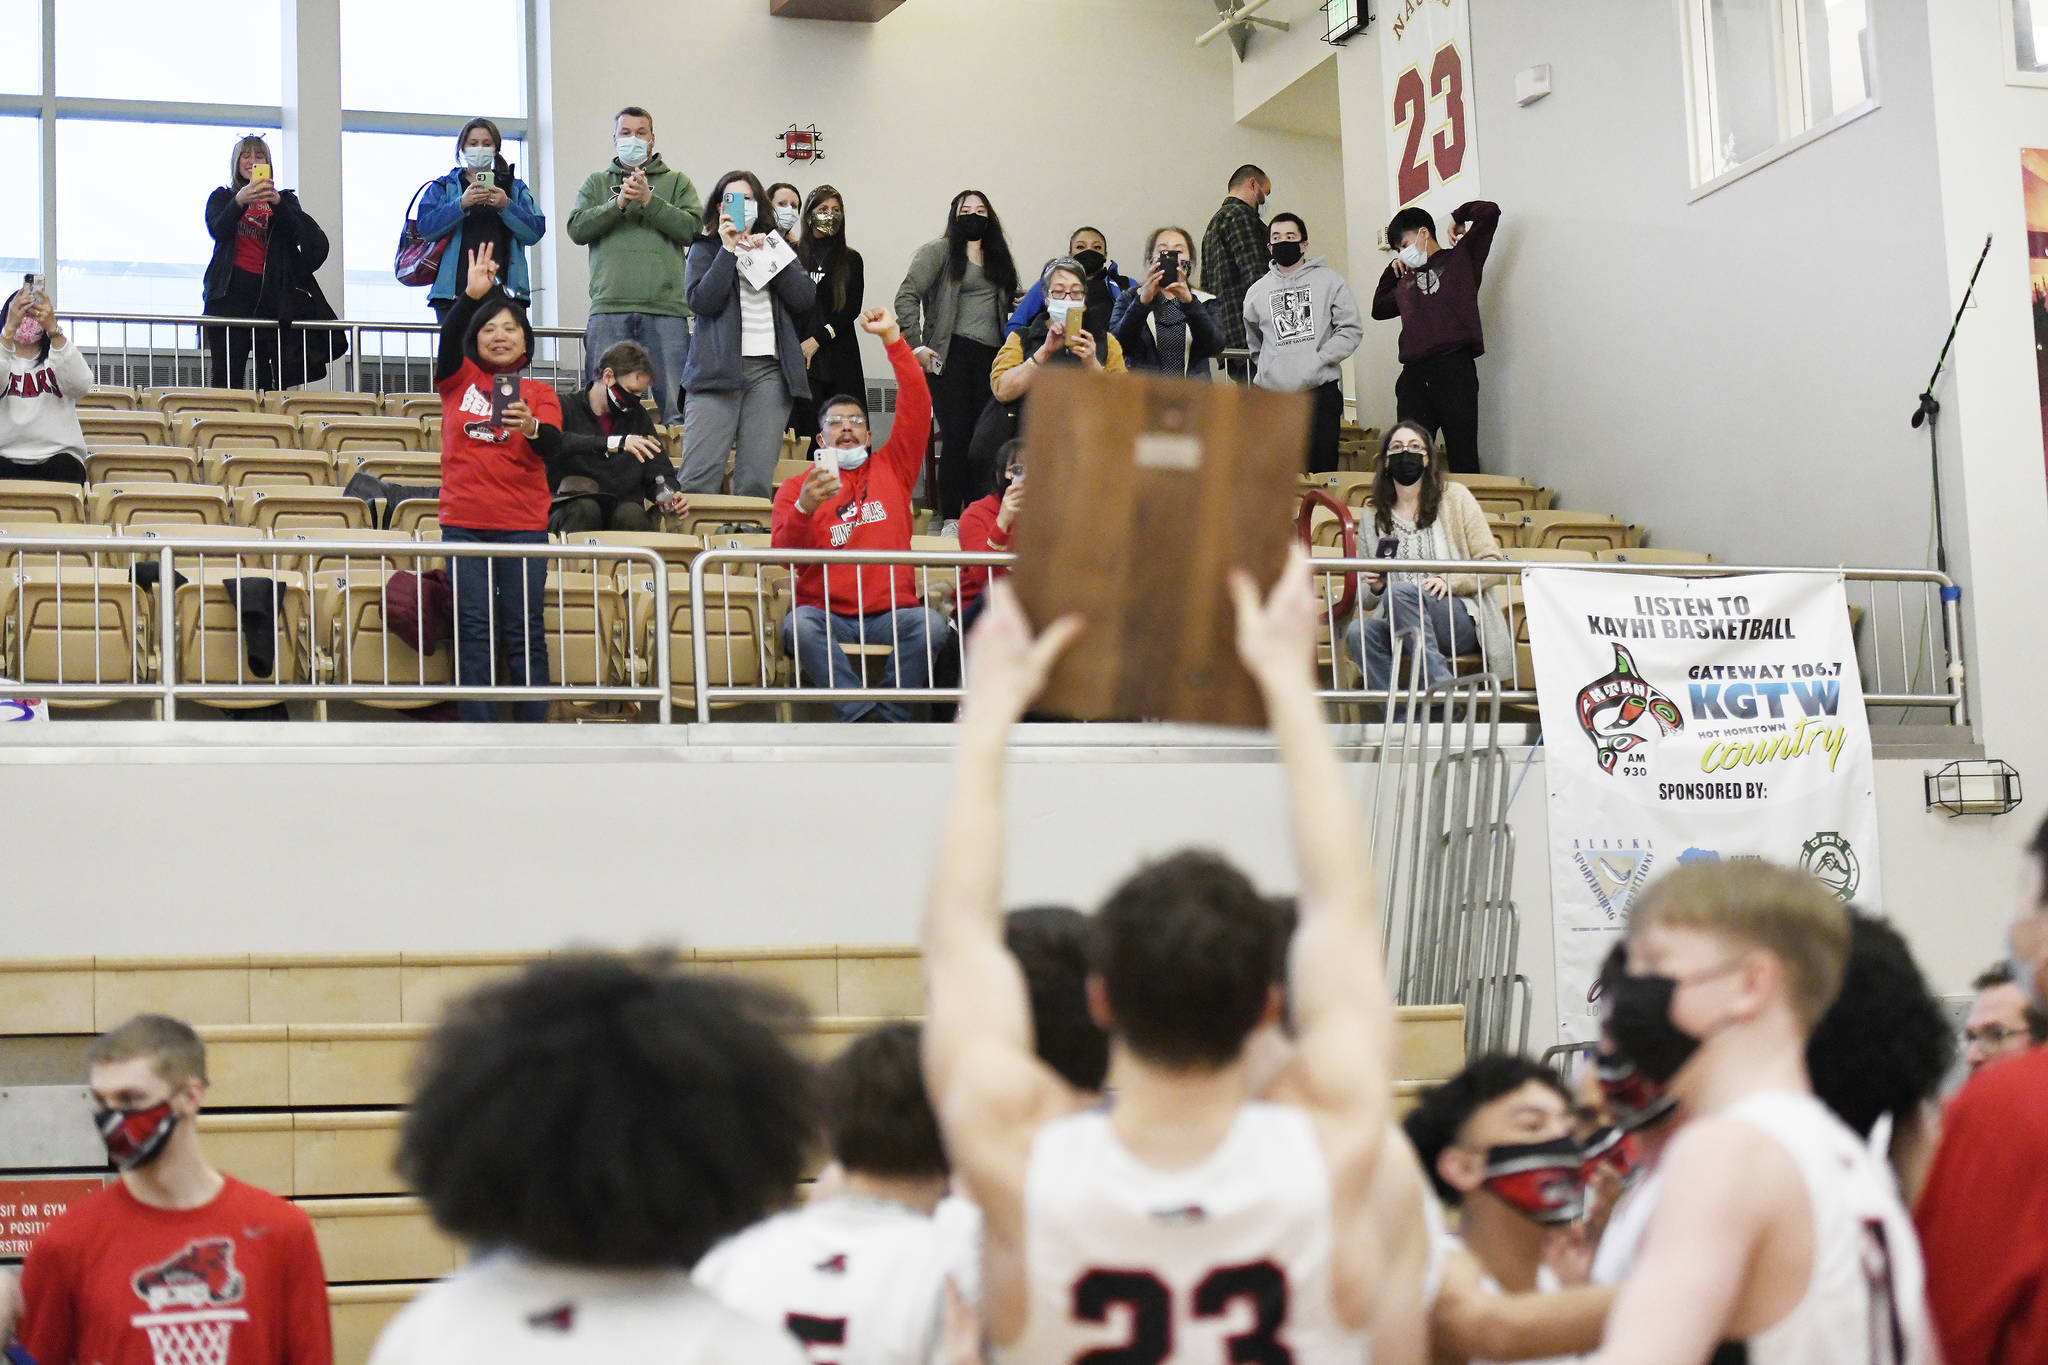 Juneau-Douglas High School Yadaa.at Kalé player Cooper Kriegmont holds the 2021 Region V championship plaque up for Juneau spectators following a 87-68 win over Ketchikan in the boys’ varsity Region V basketball championship at Clarke Cochrane Gymnasium on Saturday, March 20, 2021. (Dustin Safranek / Ketchikan Daily News)